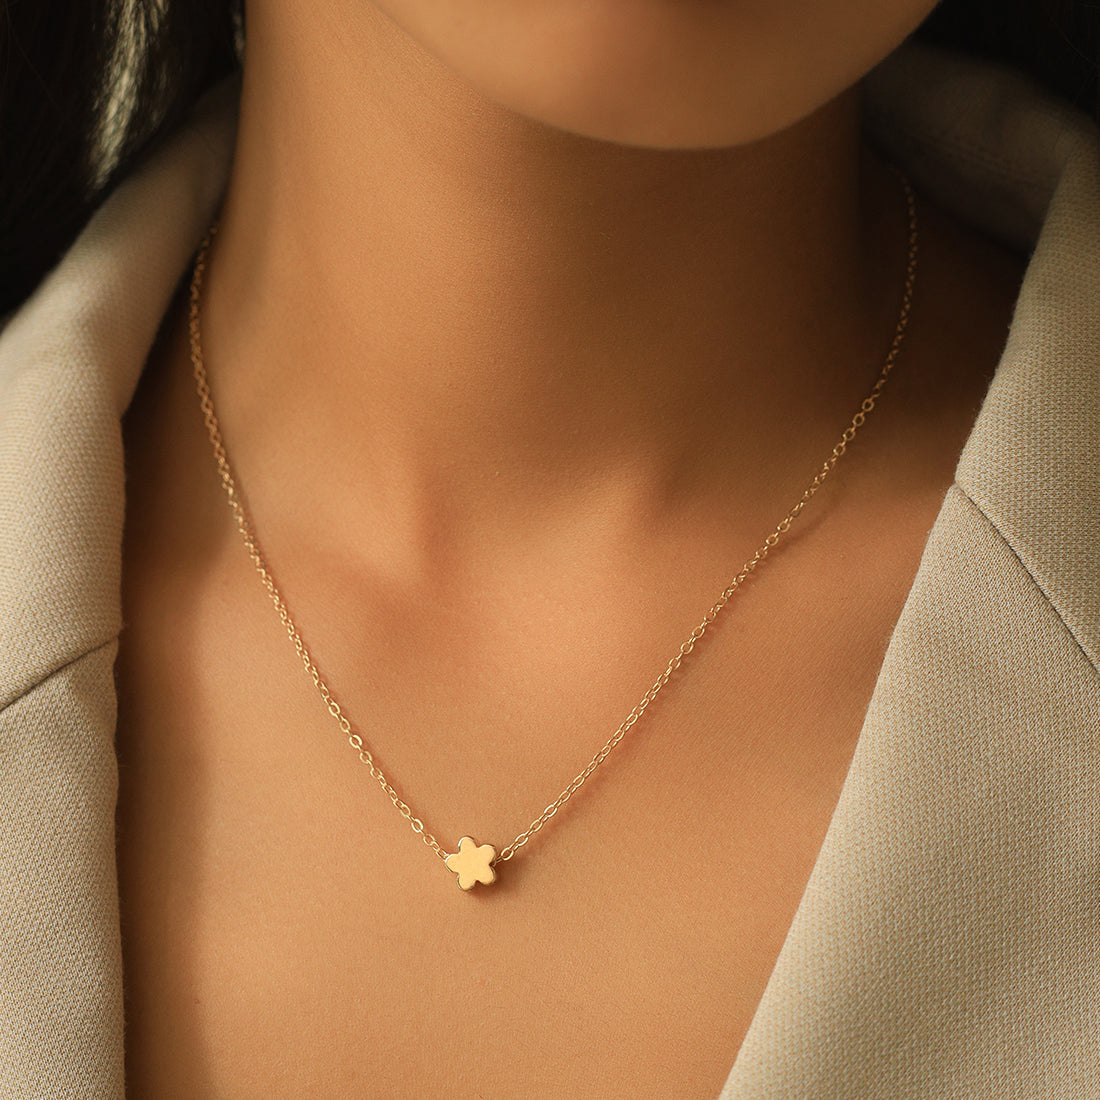 Gold-Toned Chain With Minimalist Flower Pendant